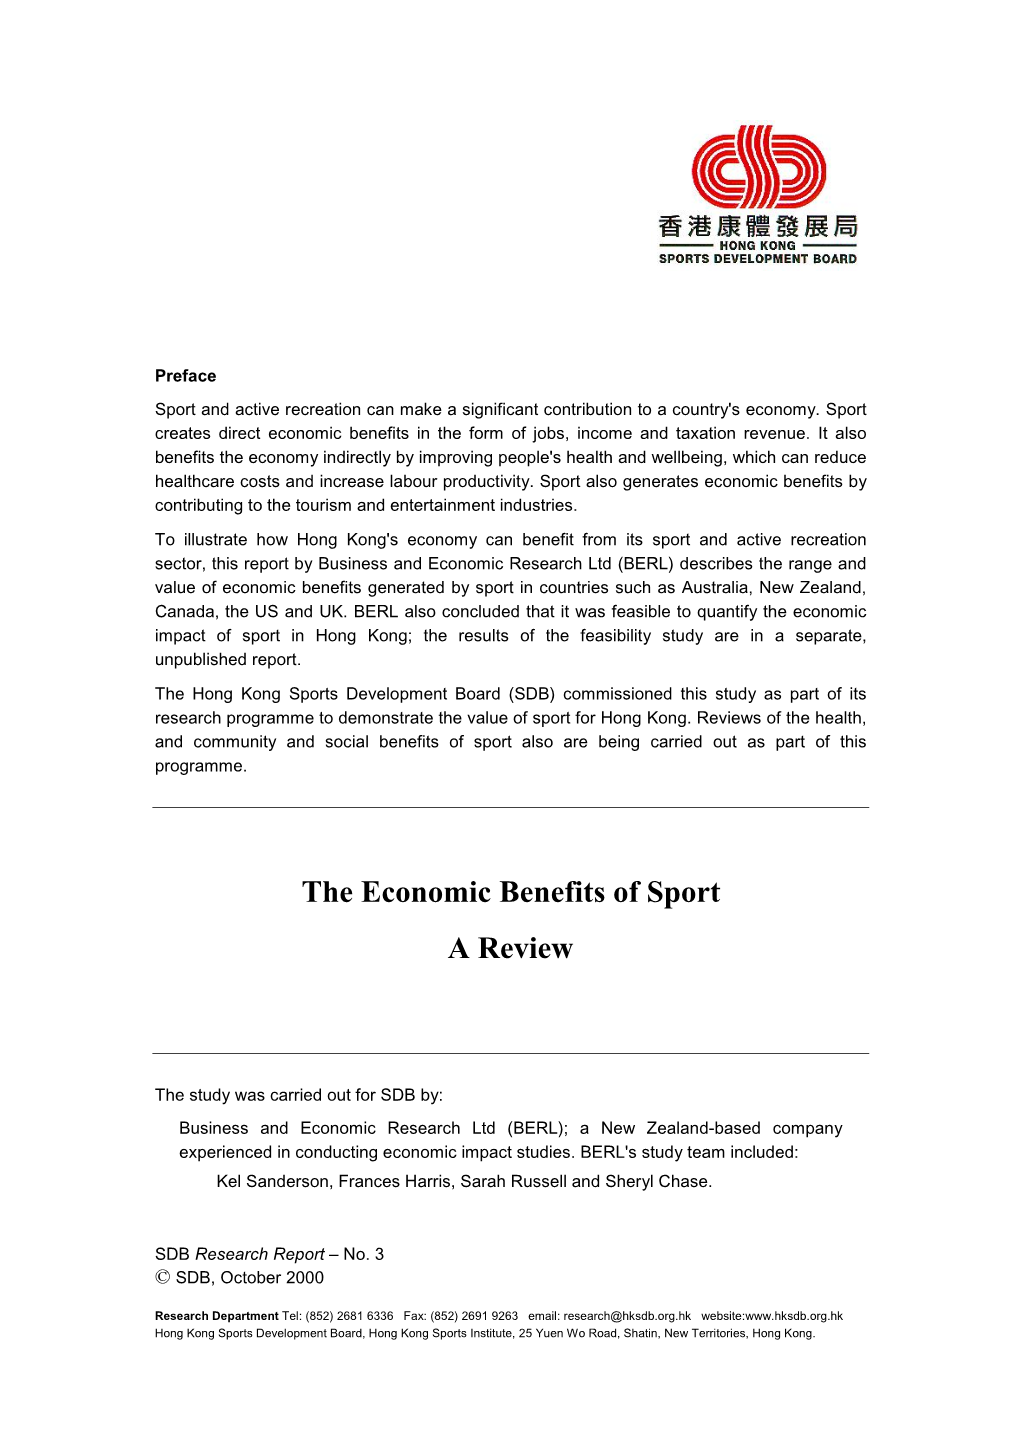 The Economic Benefits of Sport a Review